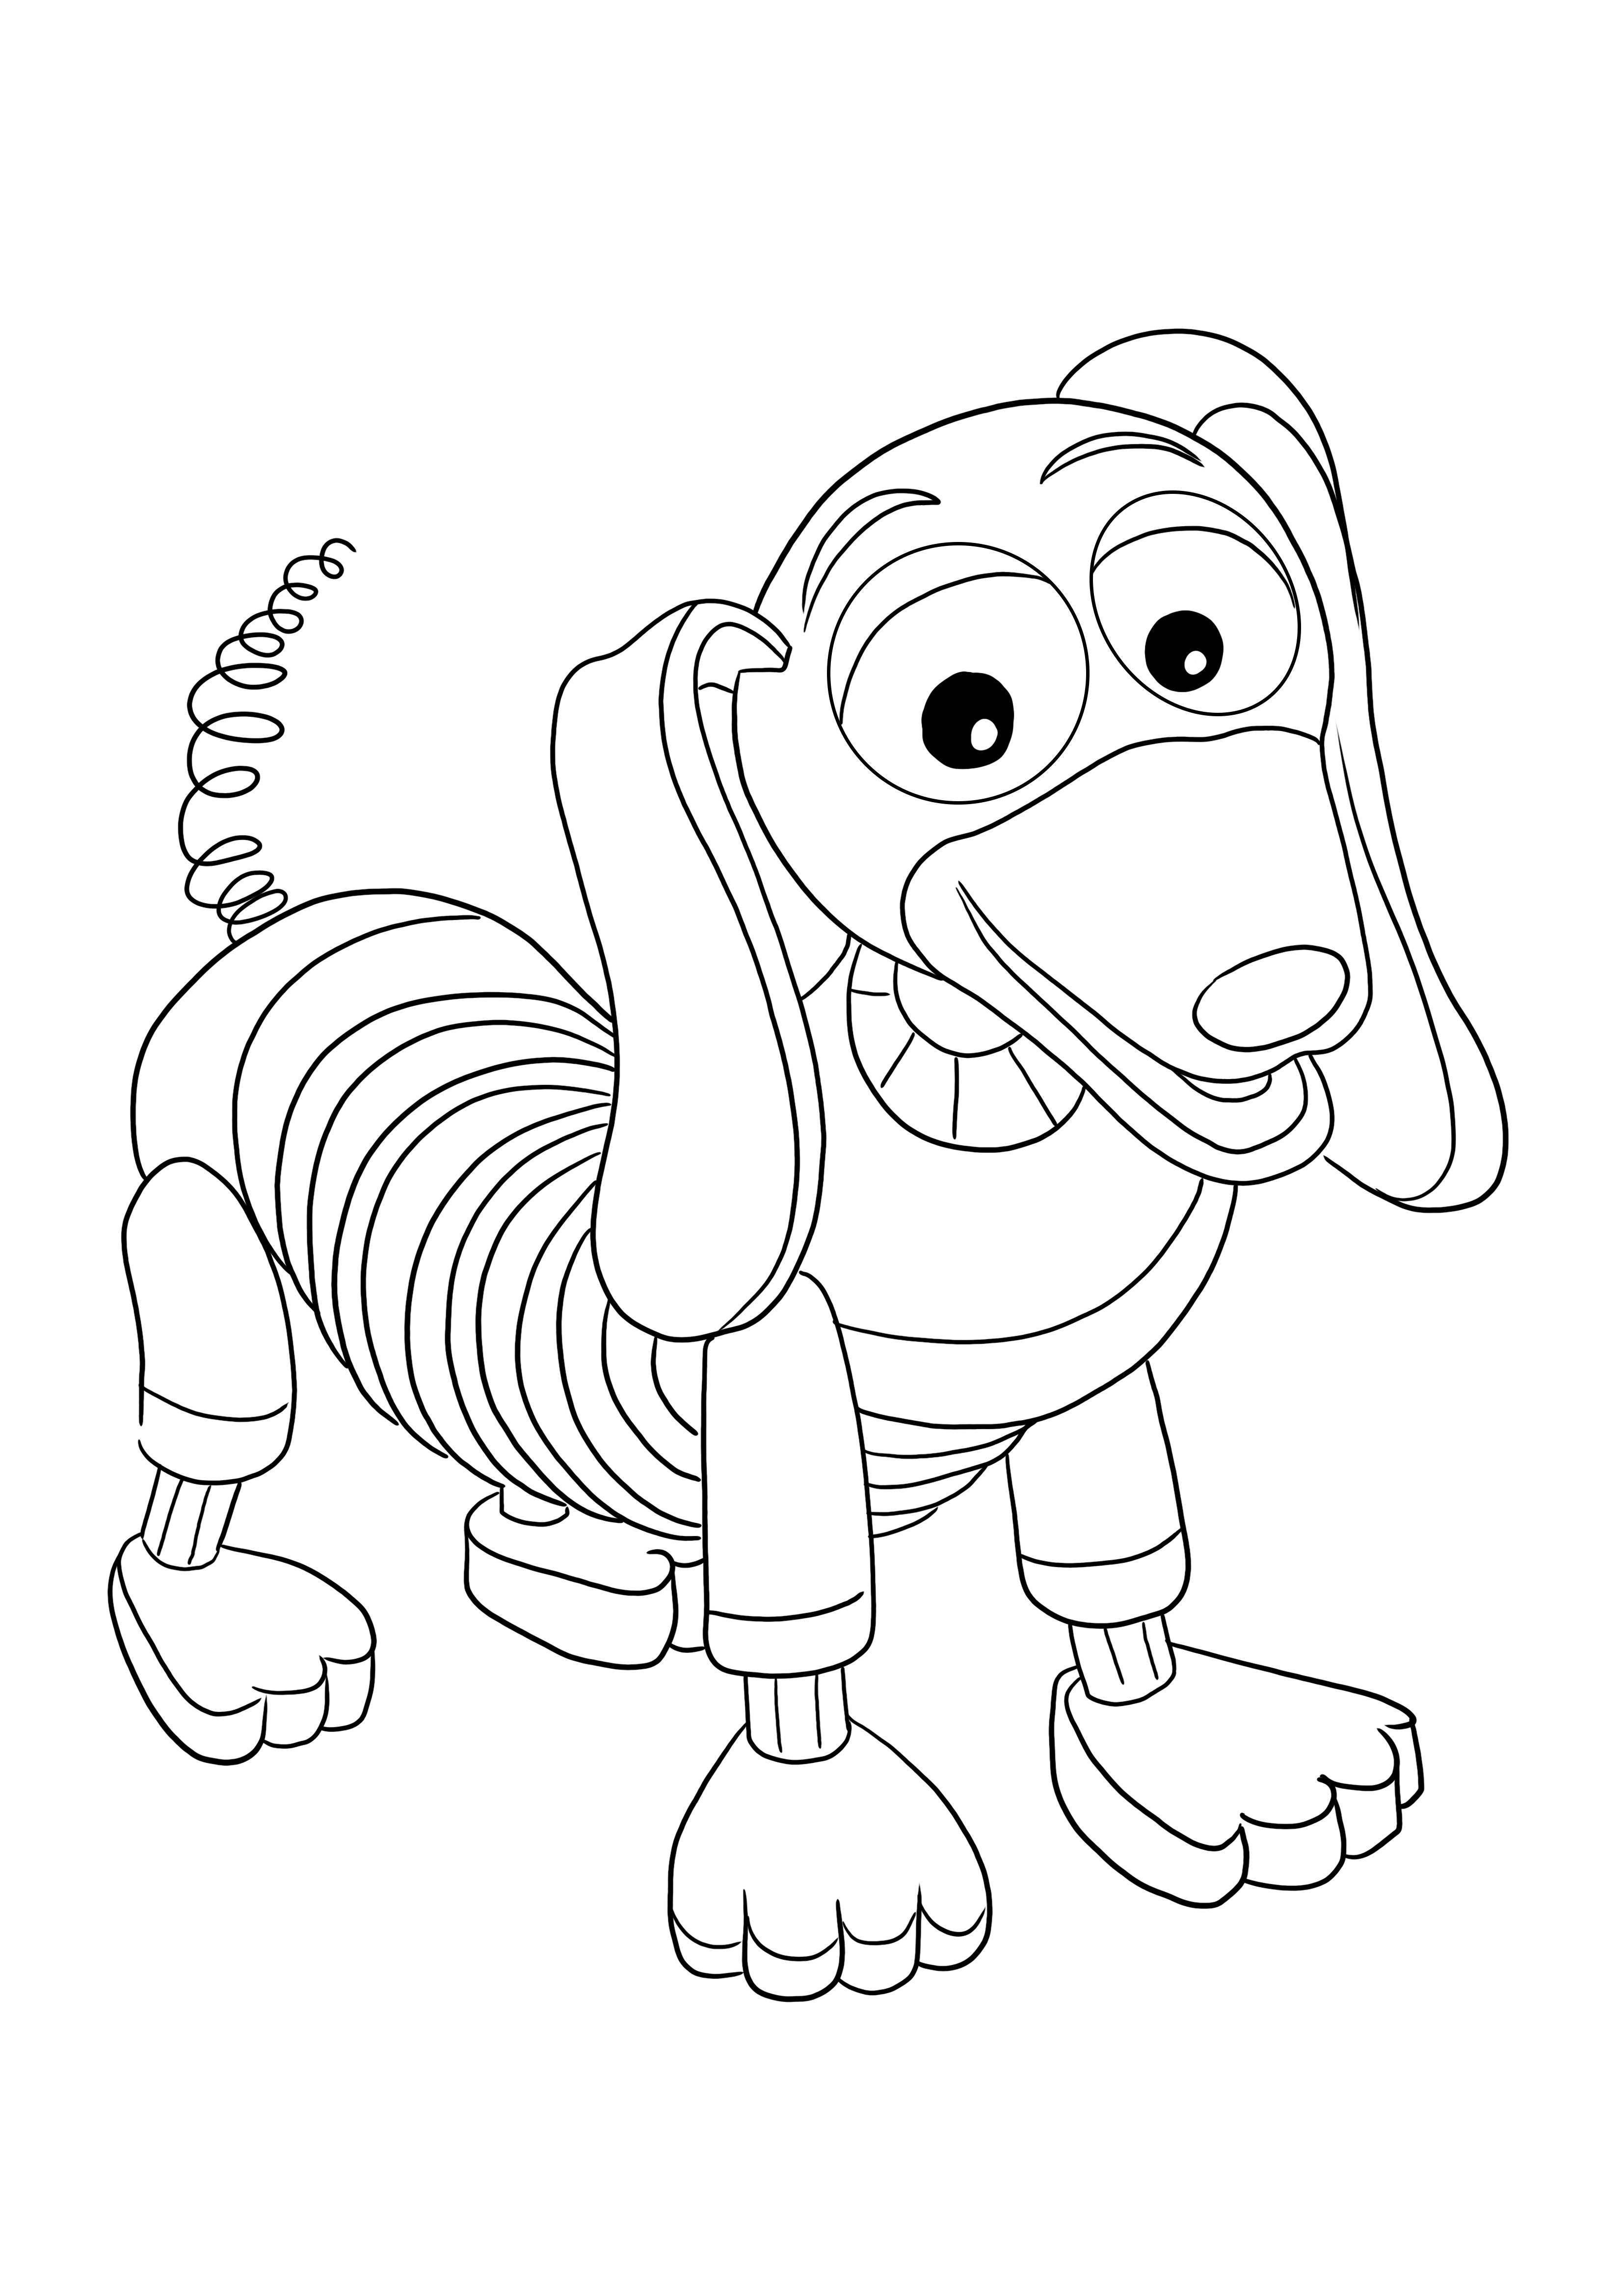 slinky-dog-for-free-printing-and-coloring-sheet-for-kids-of-all-ages